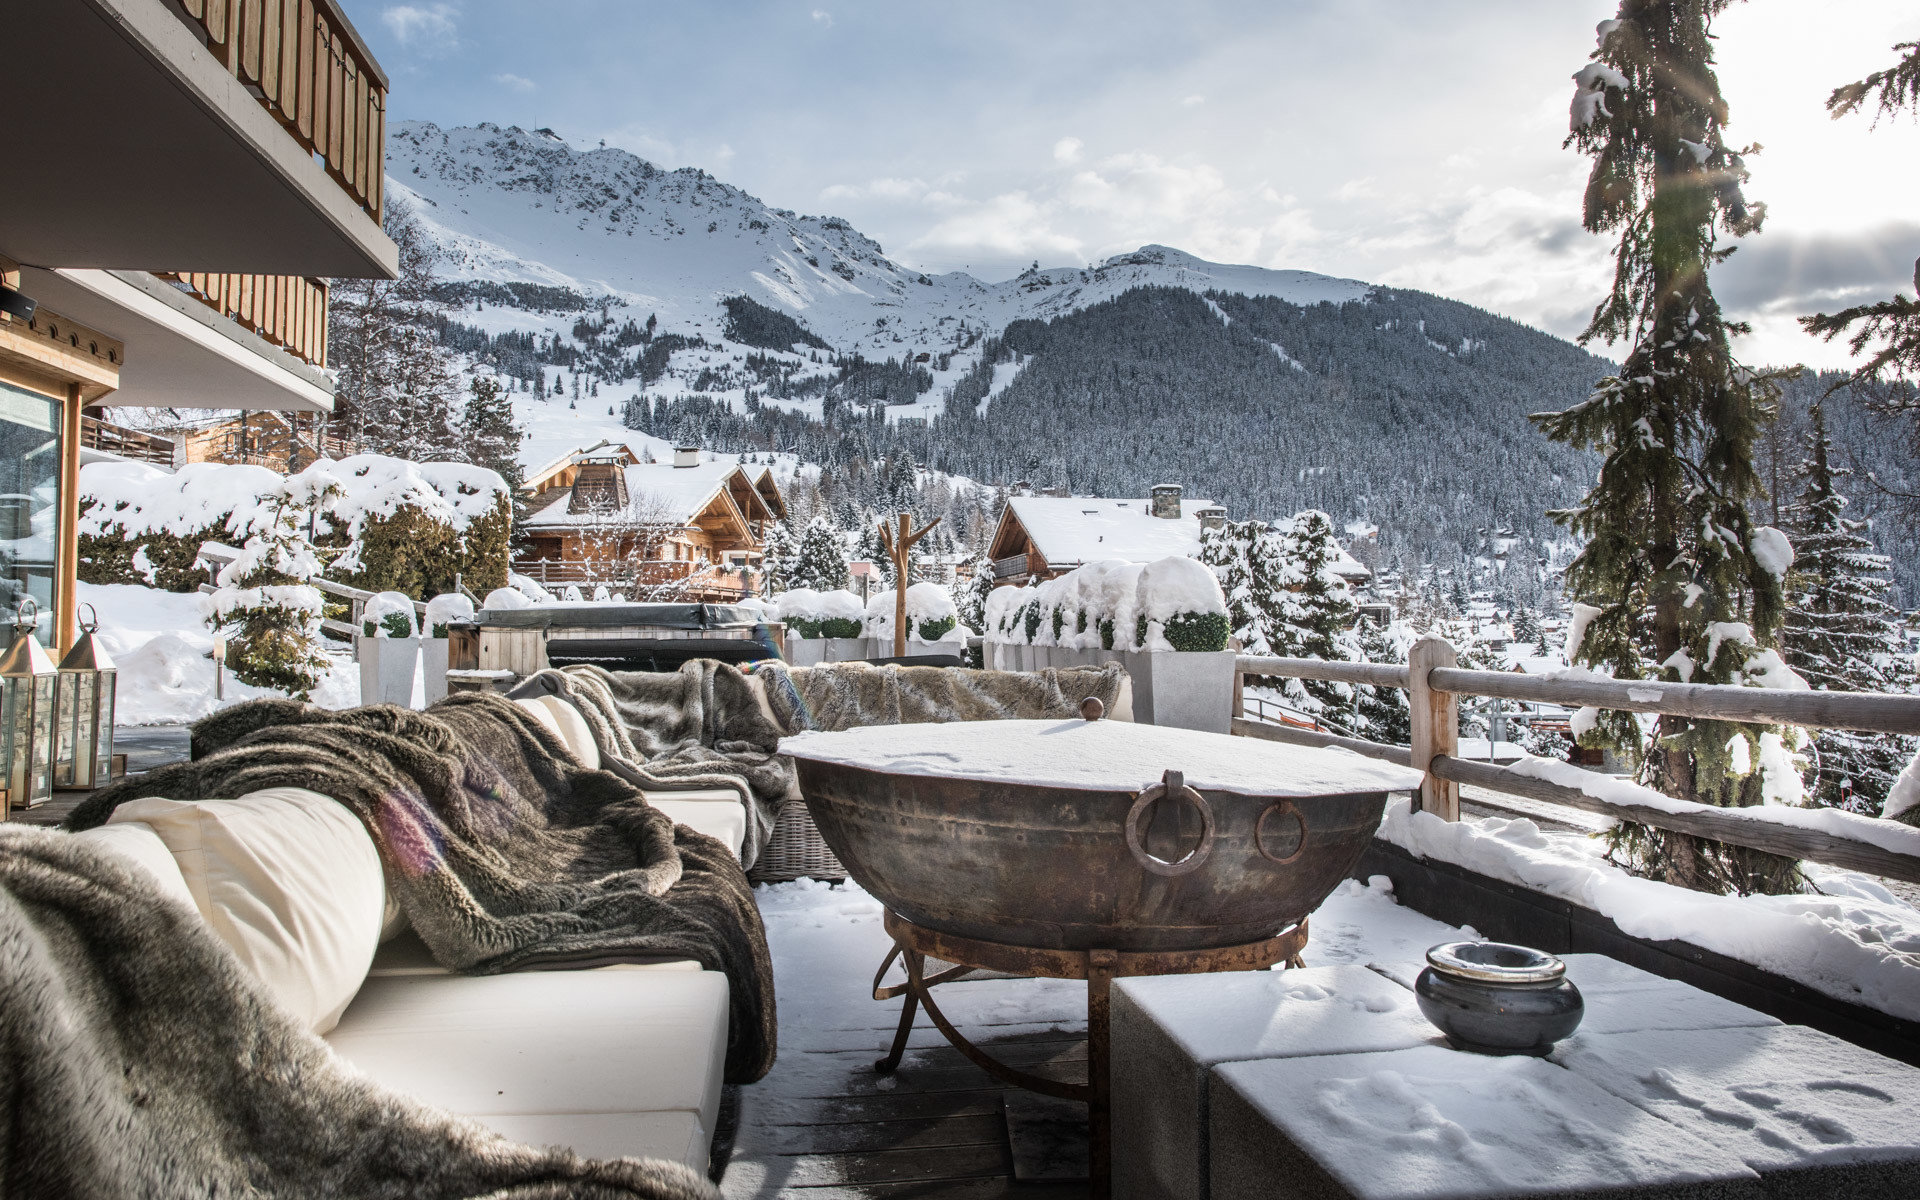 13 of the world's most luxurious ski resorts